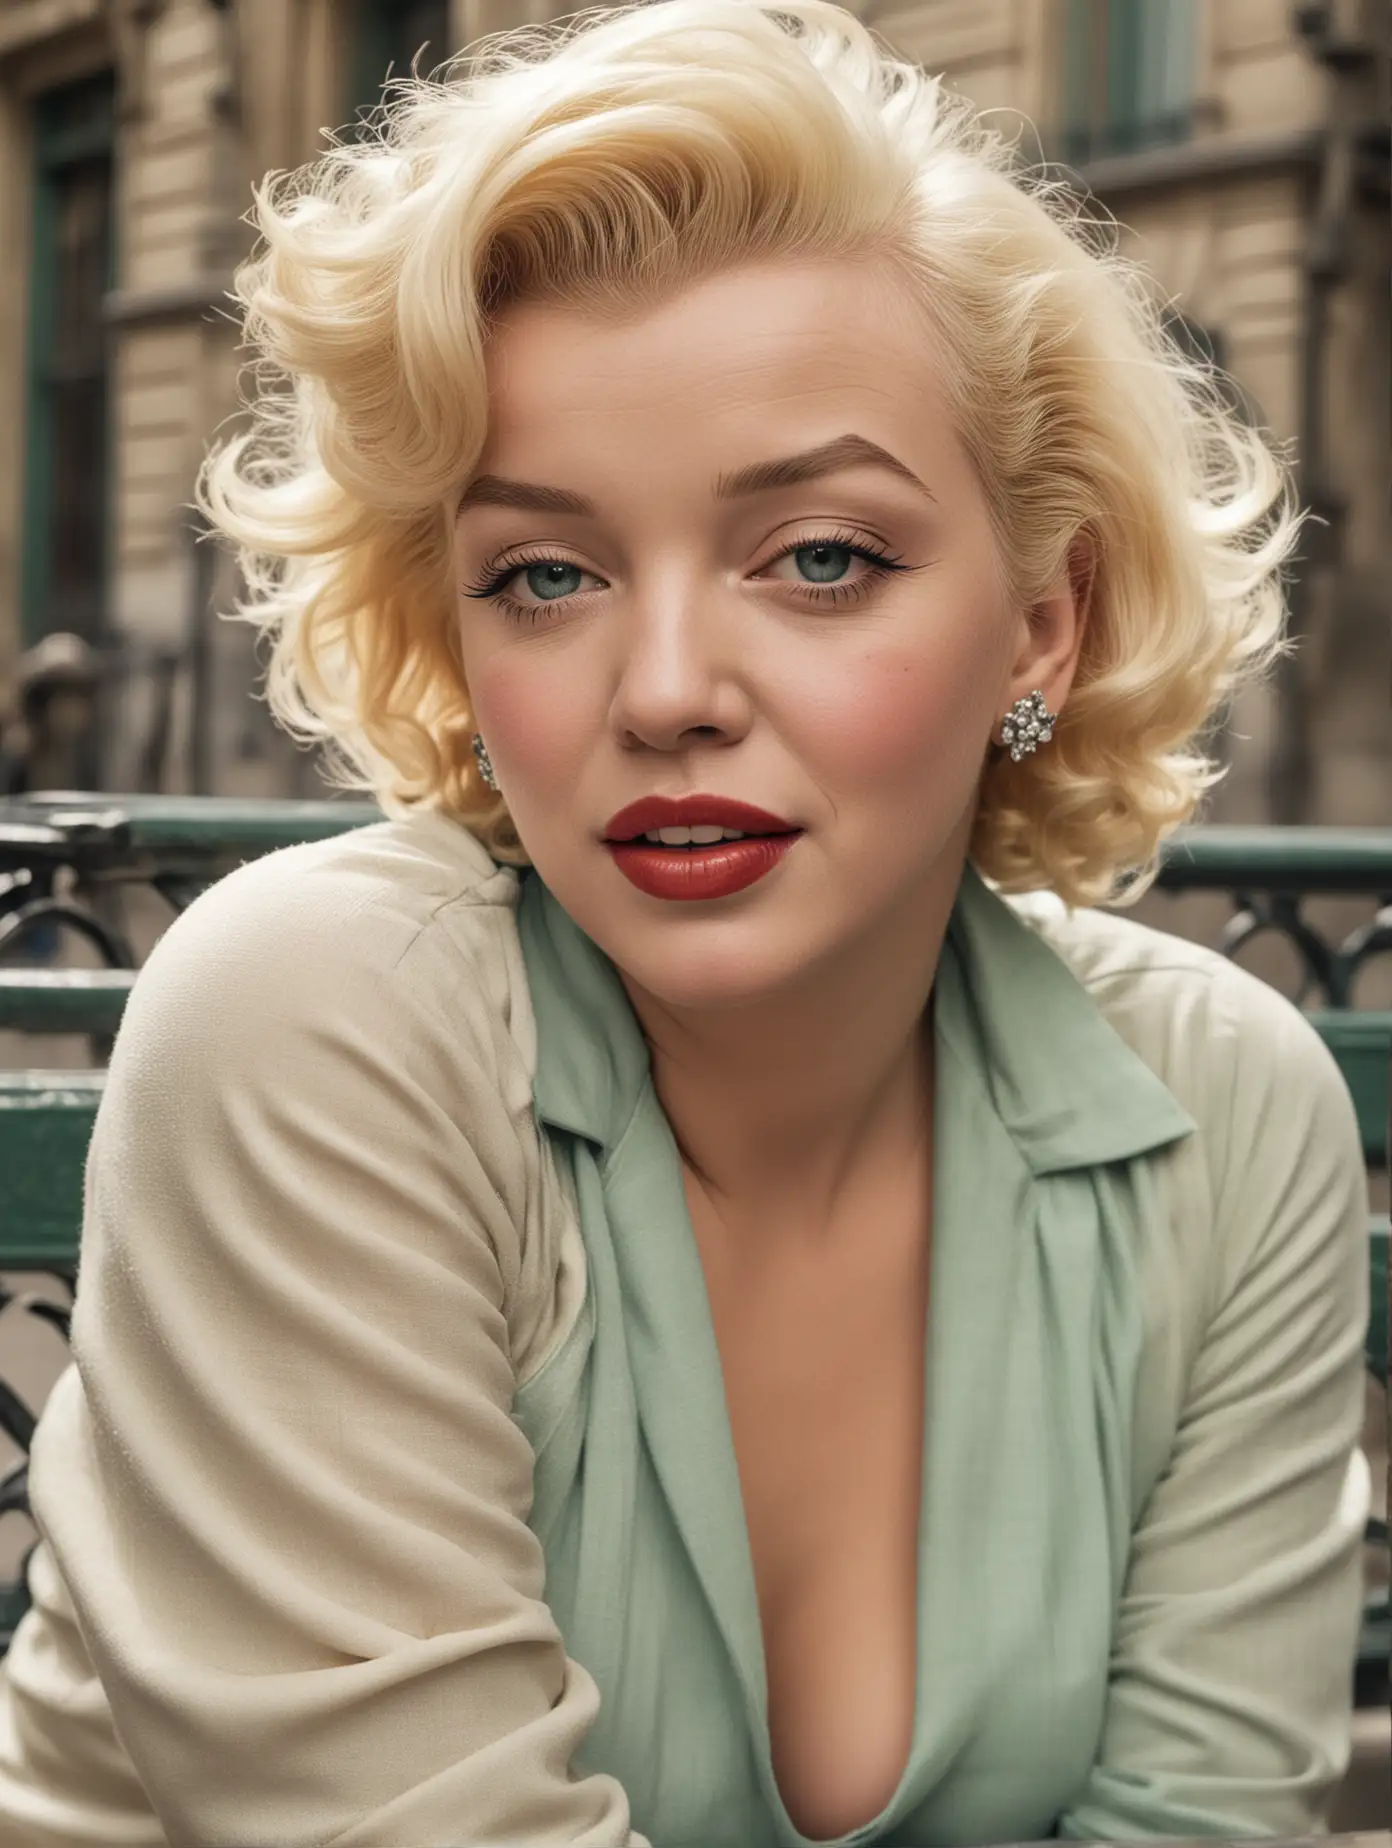 Marilyn Monroe on a Parisian bench, face detailed, colorized 